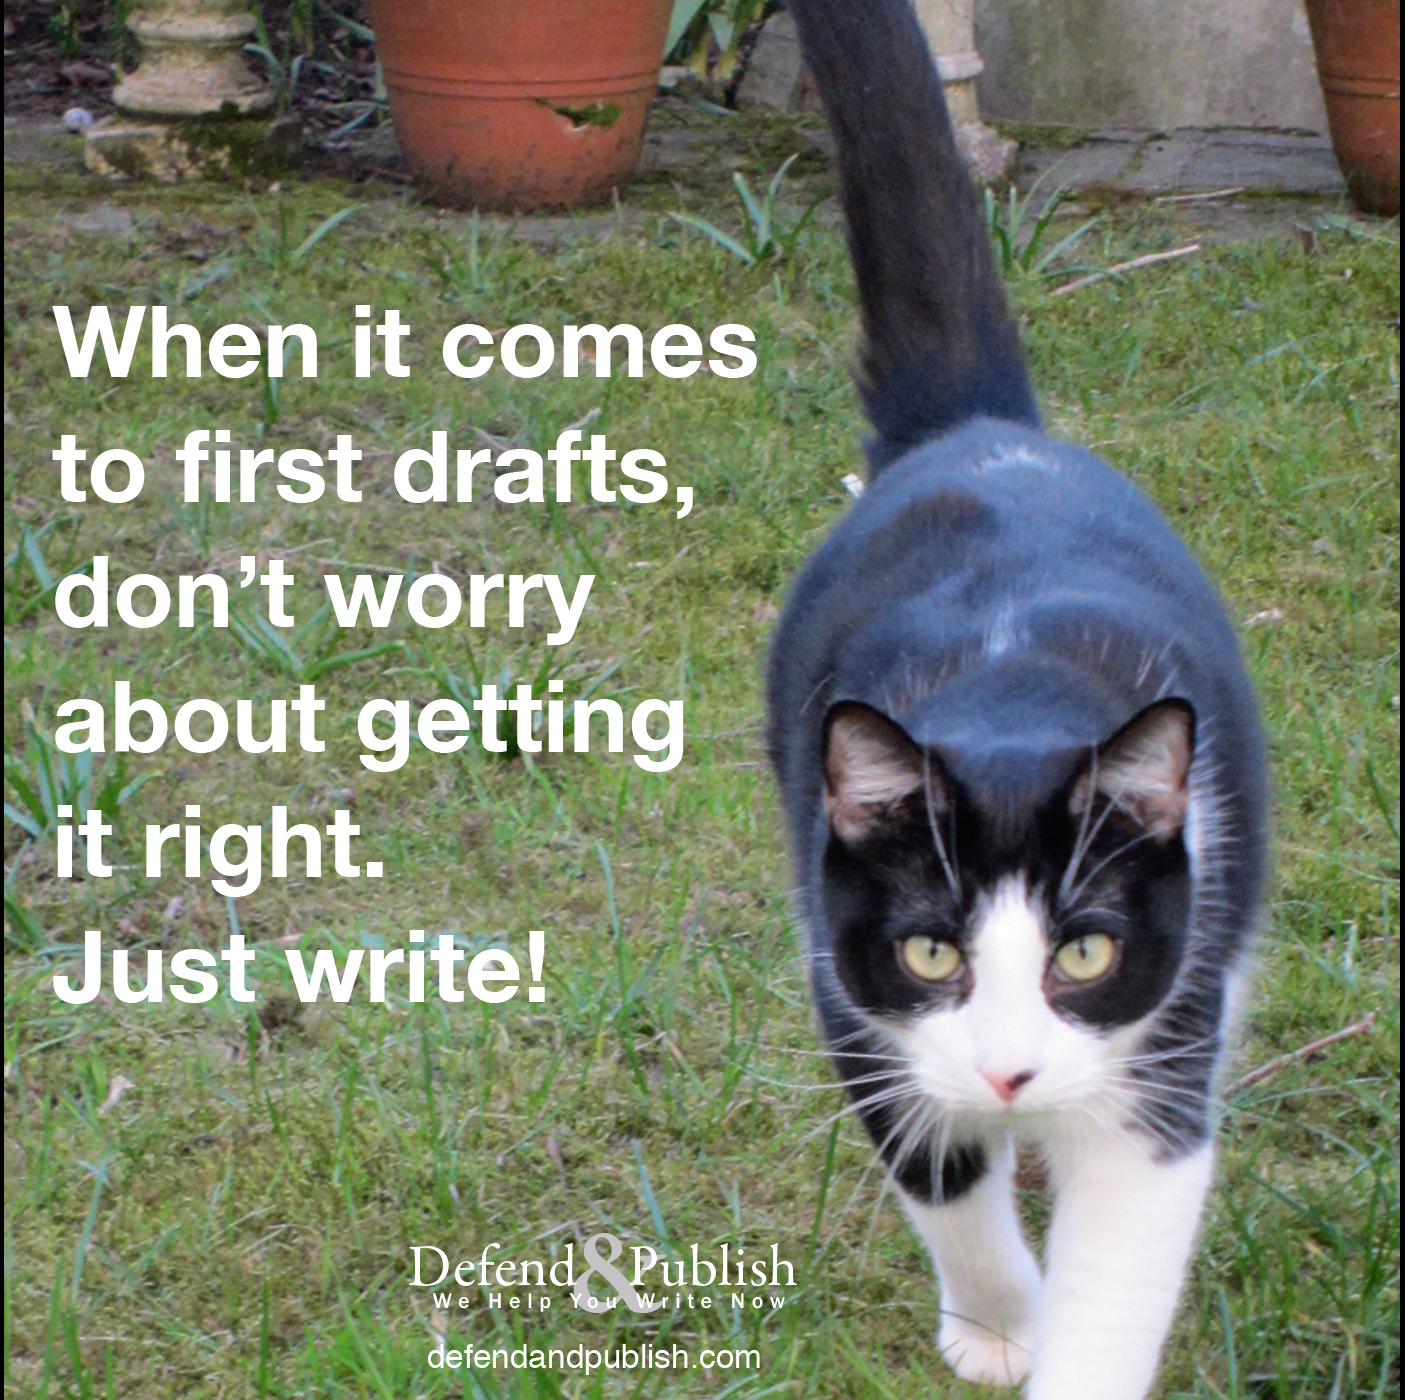 When it comes to first drafts, don't worry about getting it right. Just write!